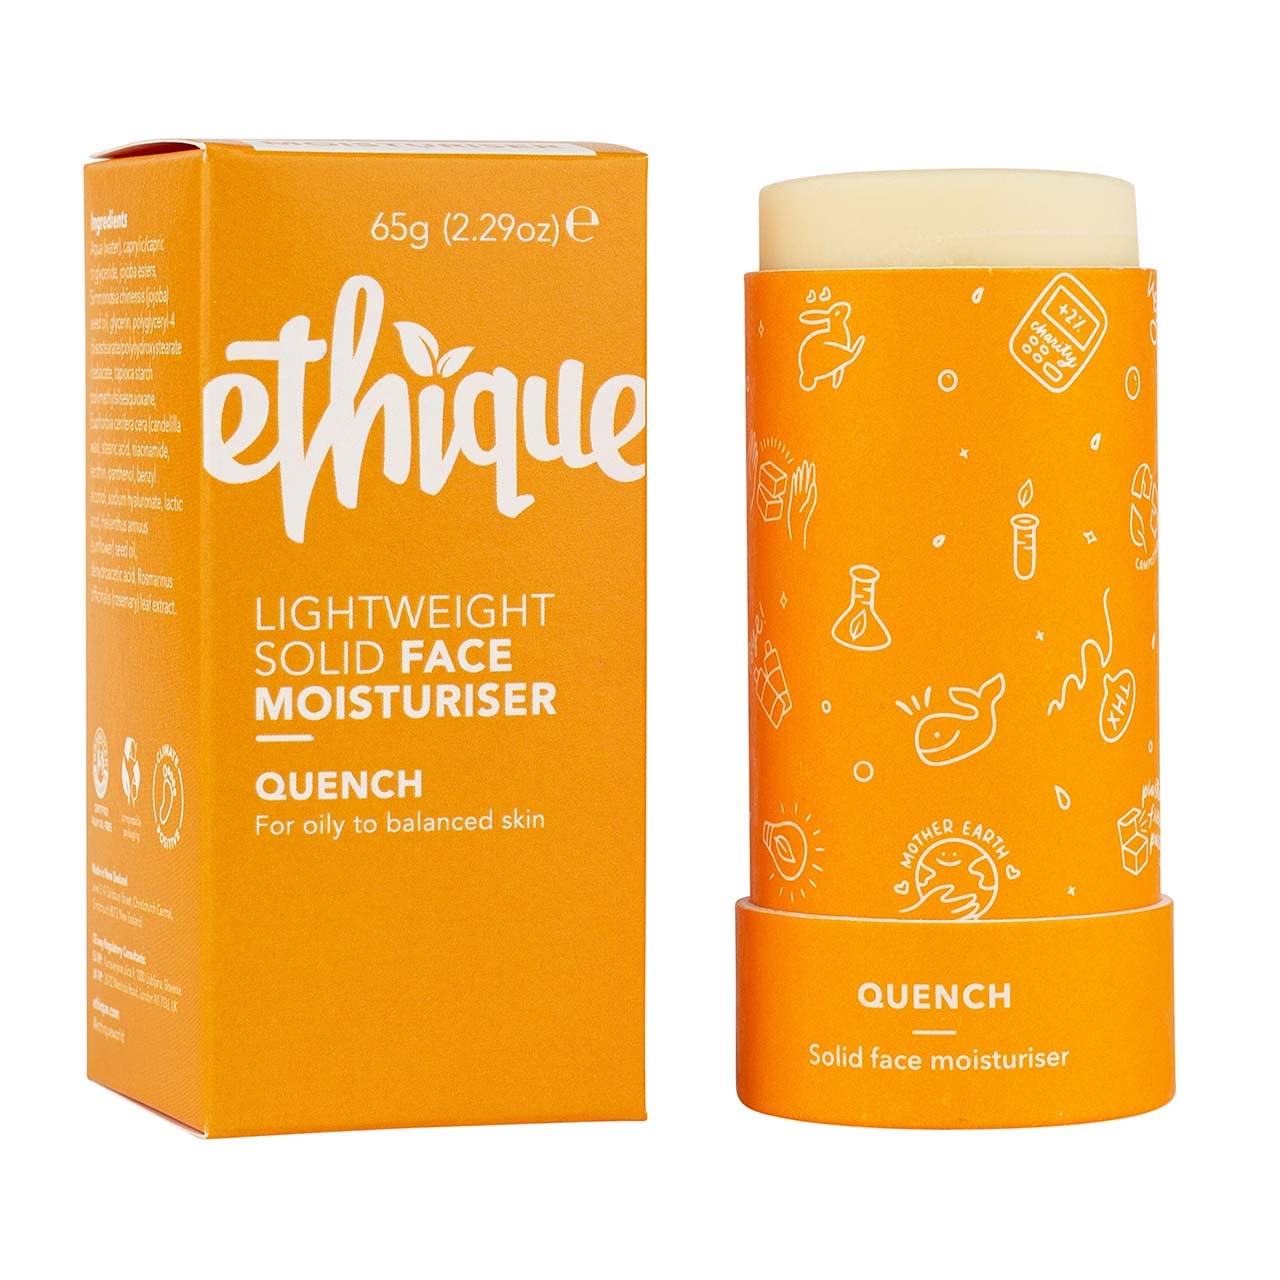 Ethique Quench Lightweight Solid Face Moisturizer Tube for Oily to Balanced Skin - Plastic-Free, Vegan, Cruelty-Free, Eco-Friendly, 2.29 oz (Pack of 1)